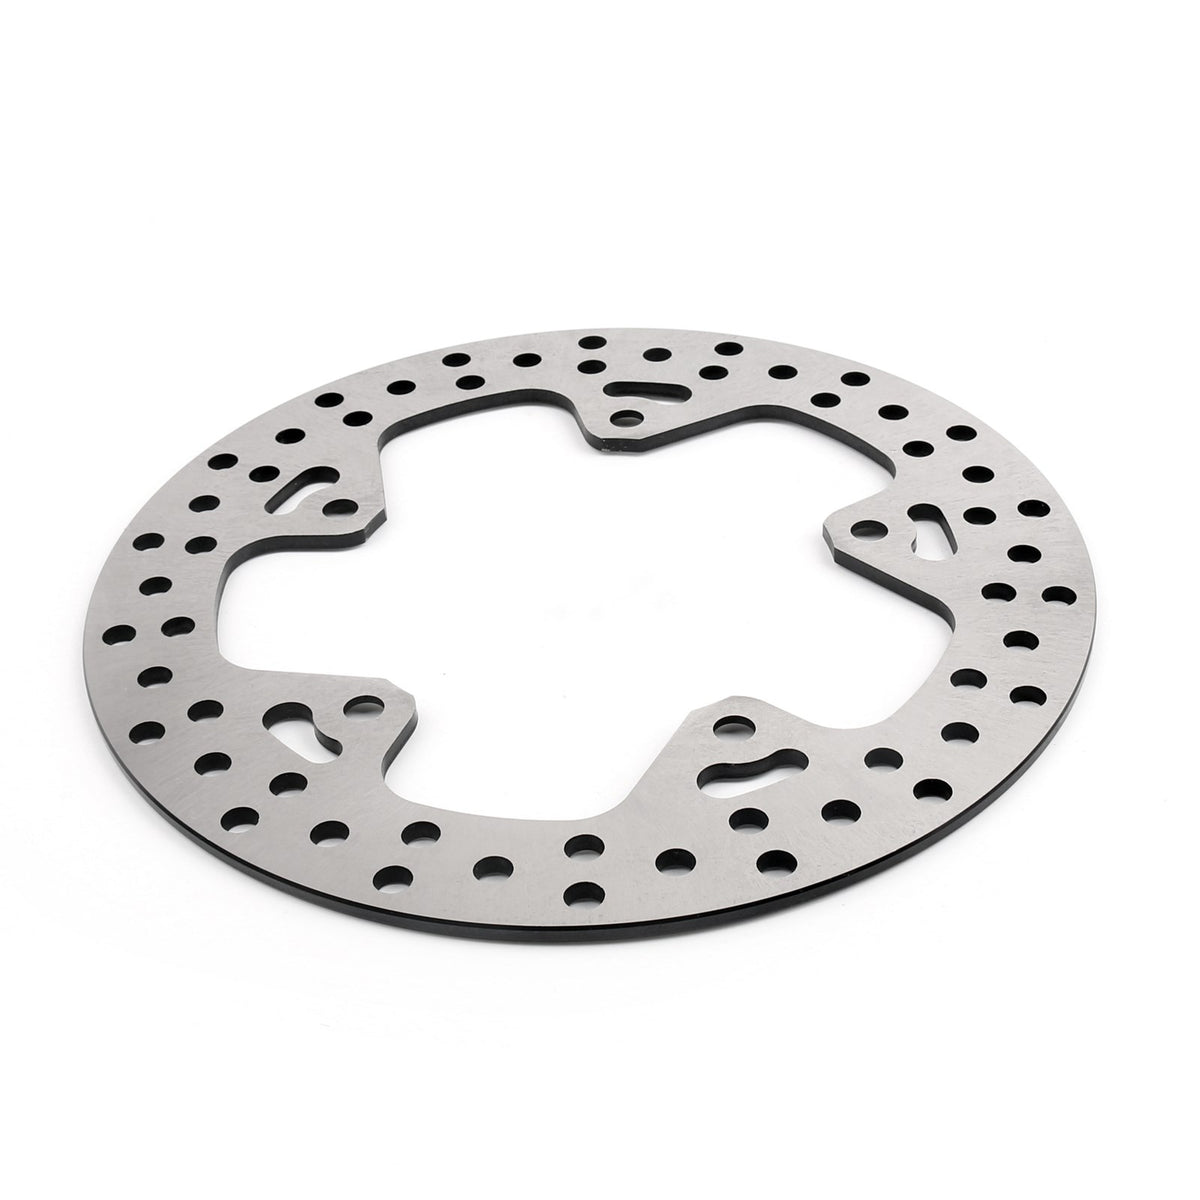 Rear Brake Rotor Disc Fit for BMW R1200GS / Adventure R1200RS R1200RT 2014-2020